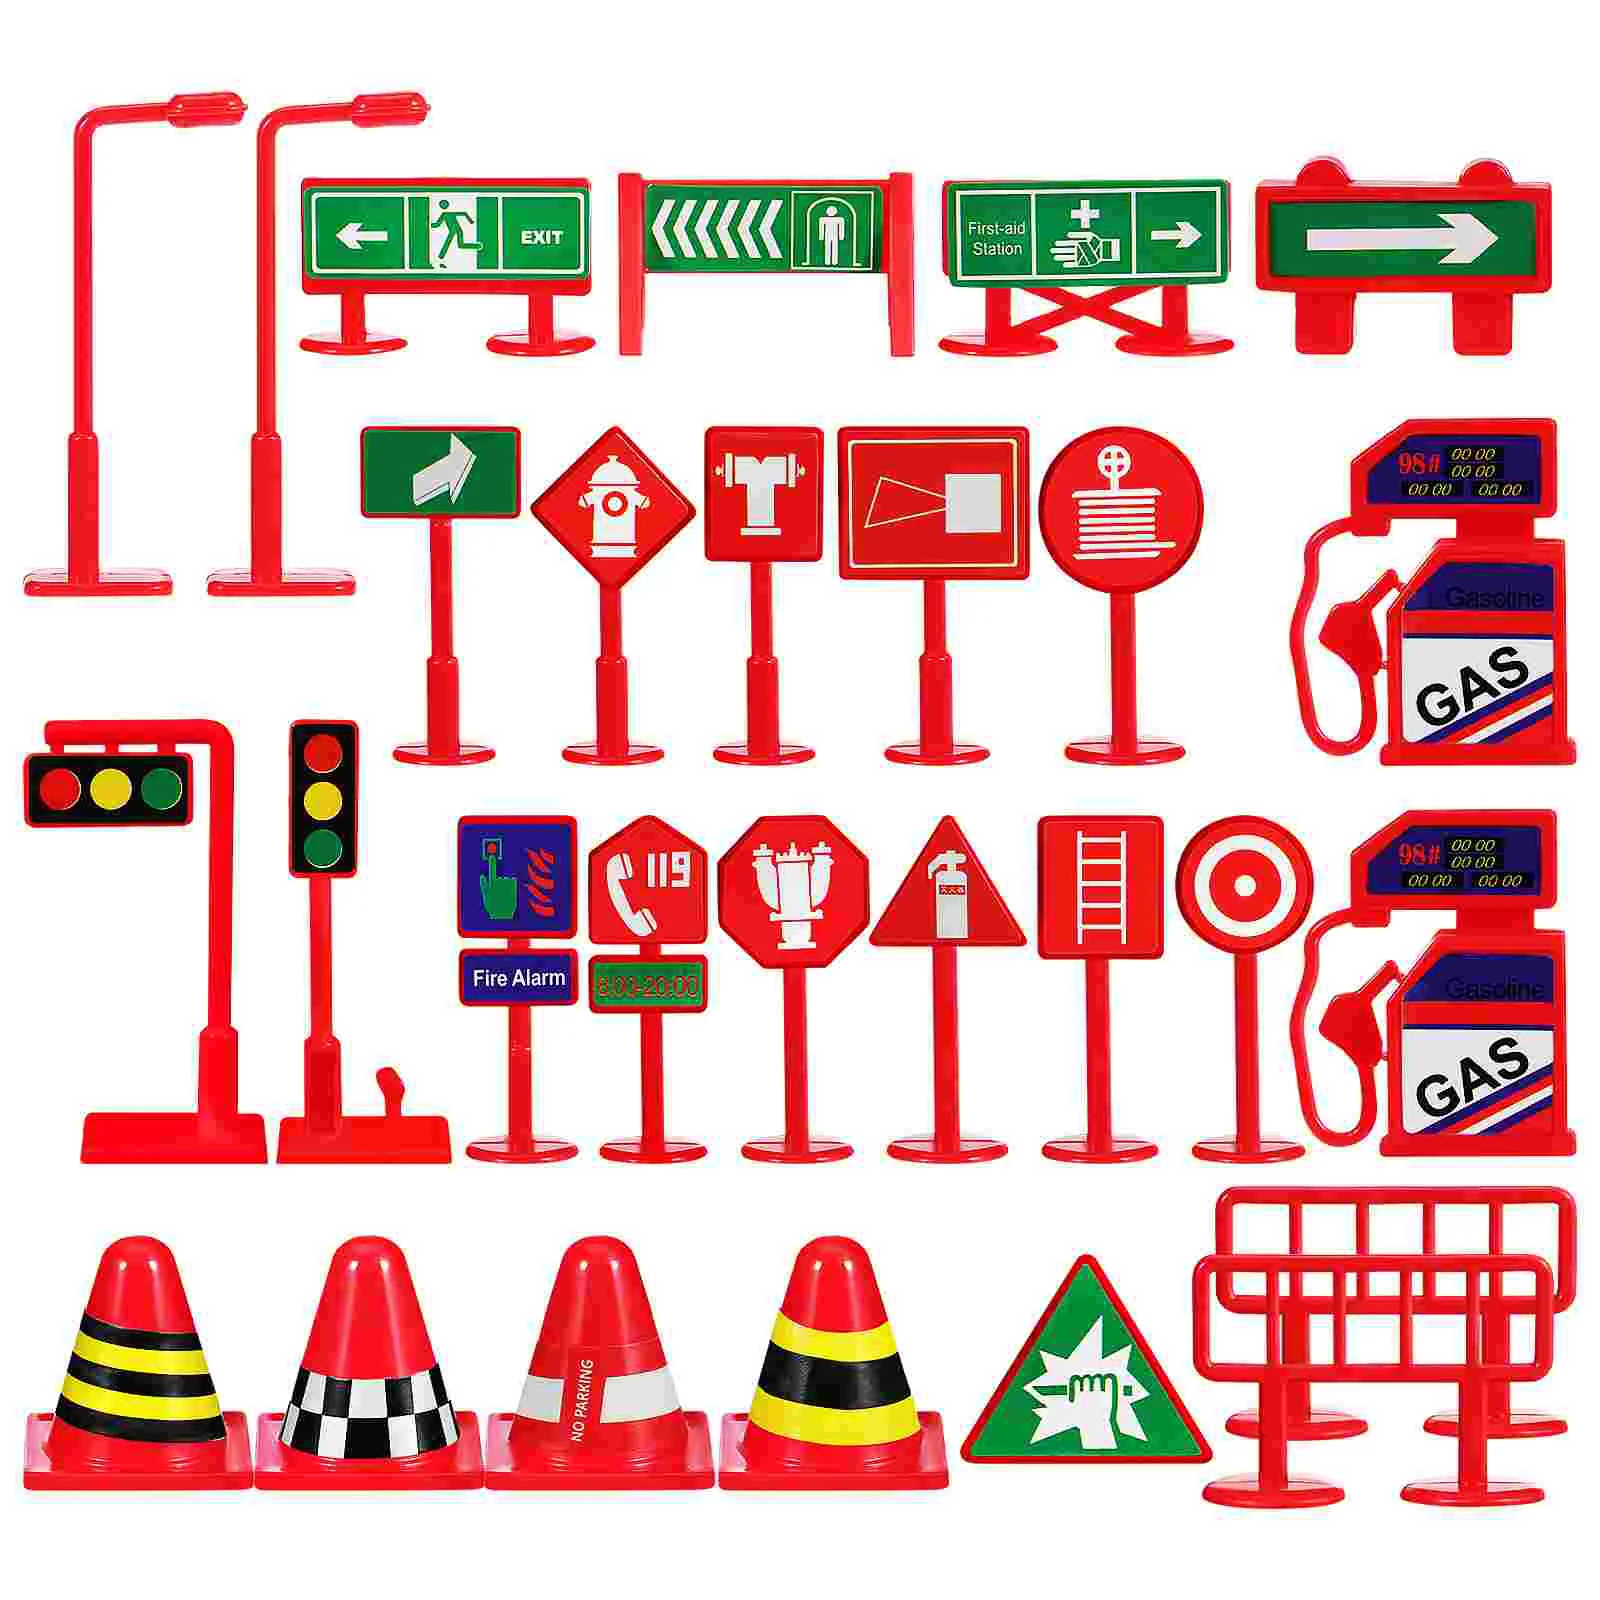 28 Pcs Mini Traffic Signs Mini Cones Traffic Light Lamp Street Sign Toy Educational Traffic Signs Toy toy traffic toys for kids sound light mini cones sign models plastic signs signal plaything child